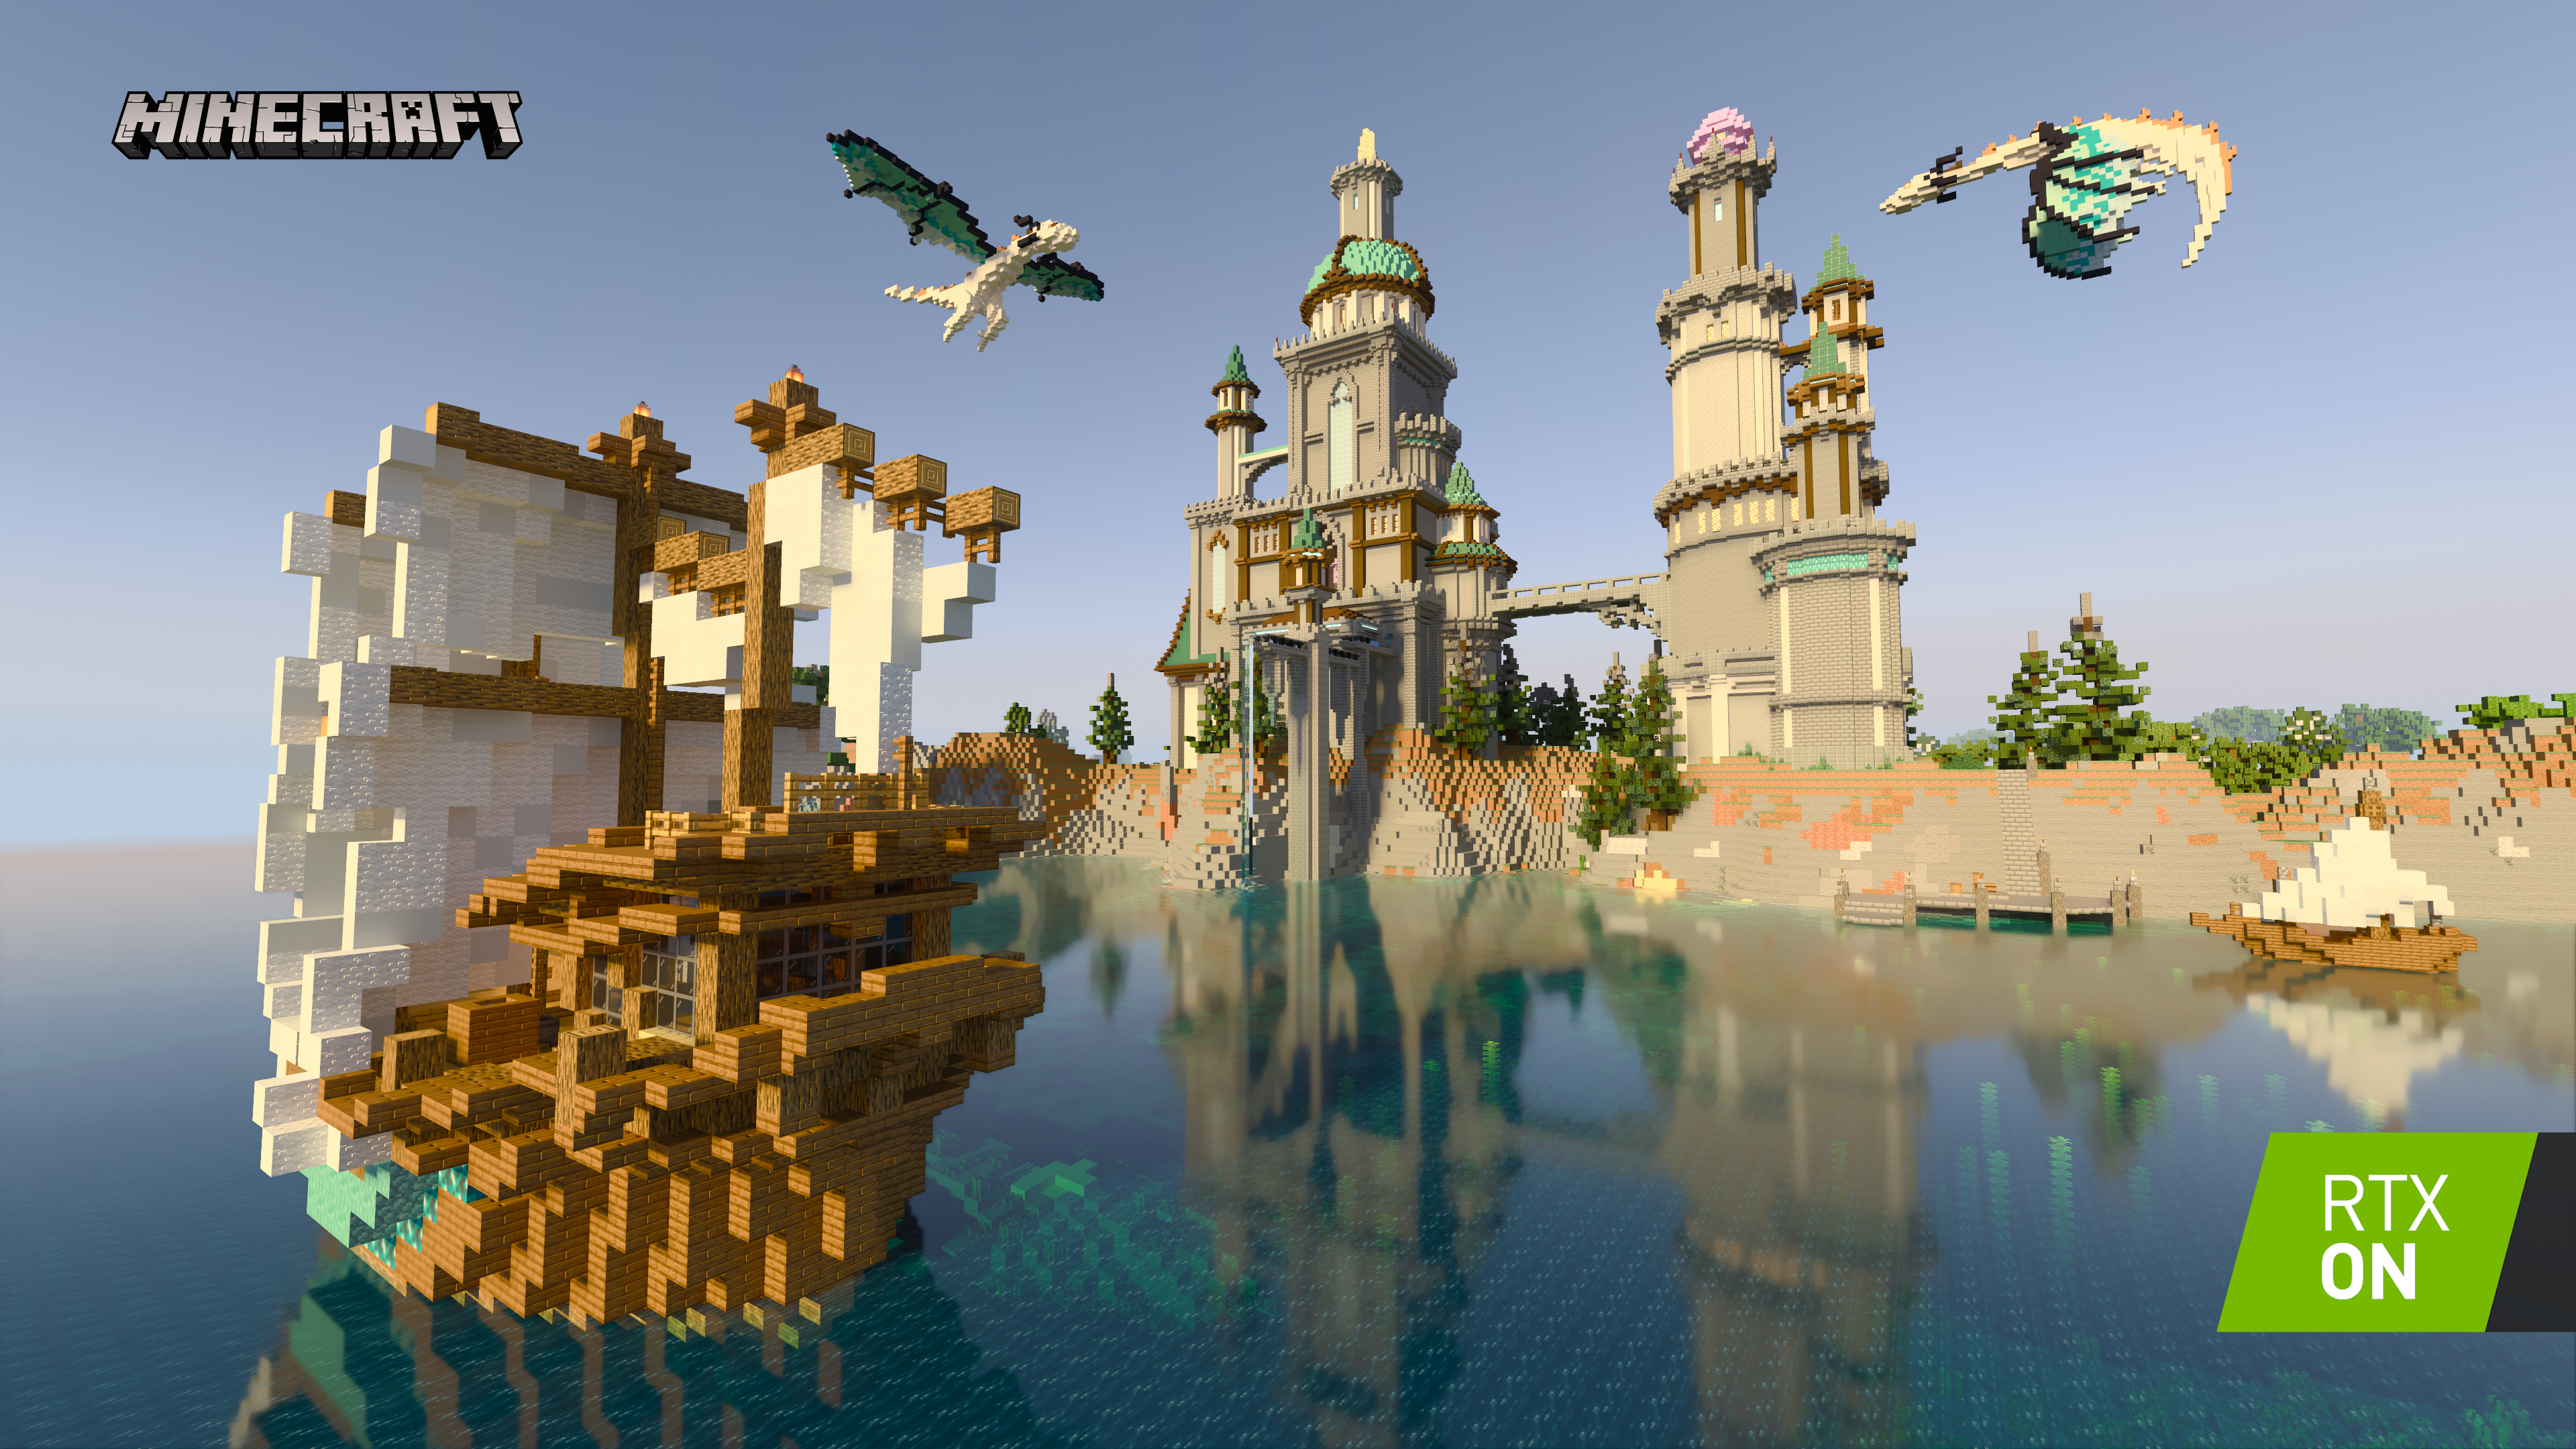 Minecraft with RTX Beta Begins April 16, Featuring Ray Tracing and NVIDIA  DLSS 2.0, GeForce News